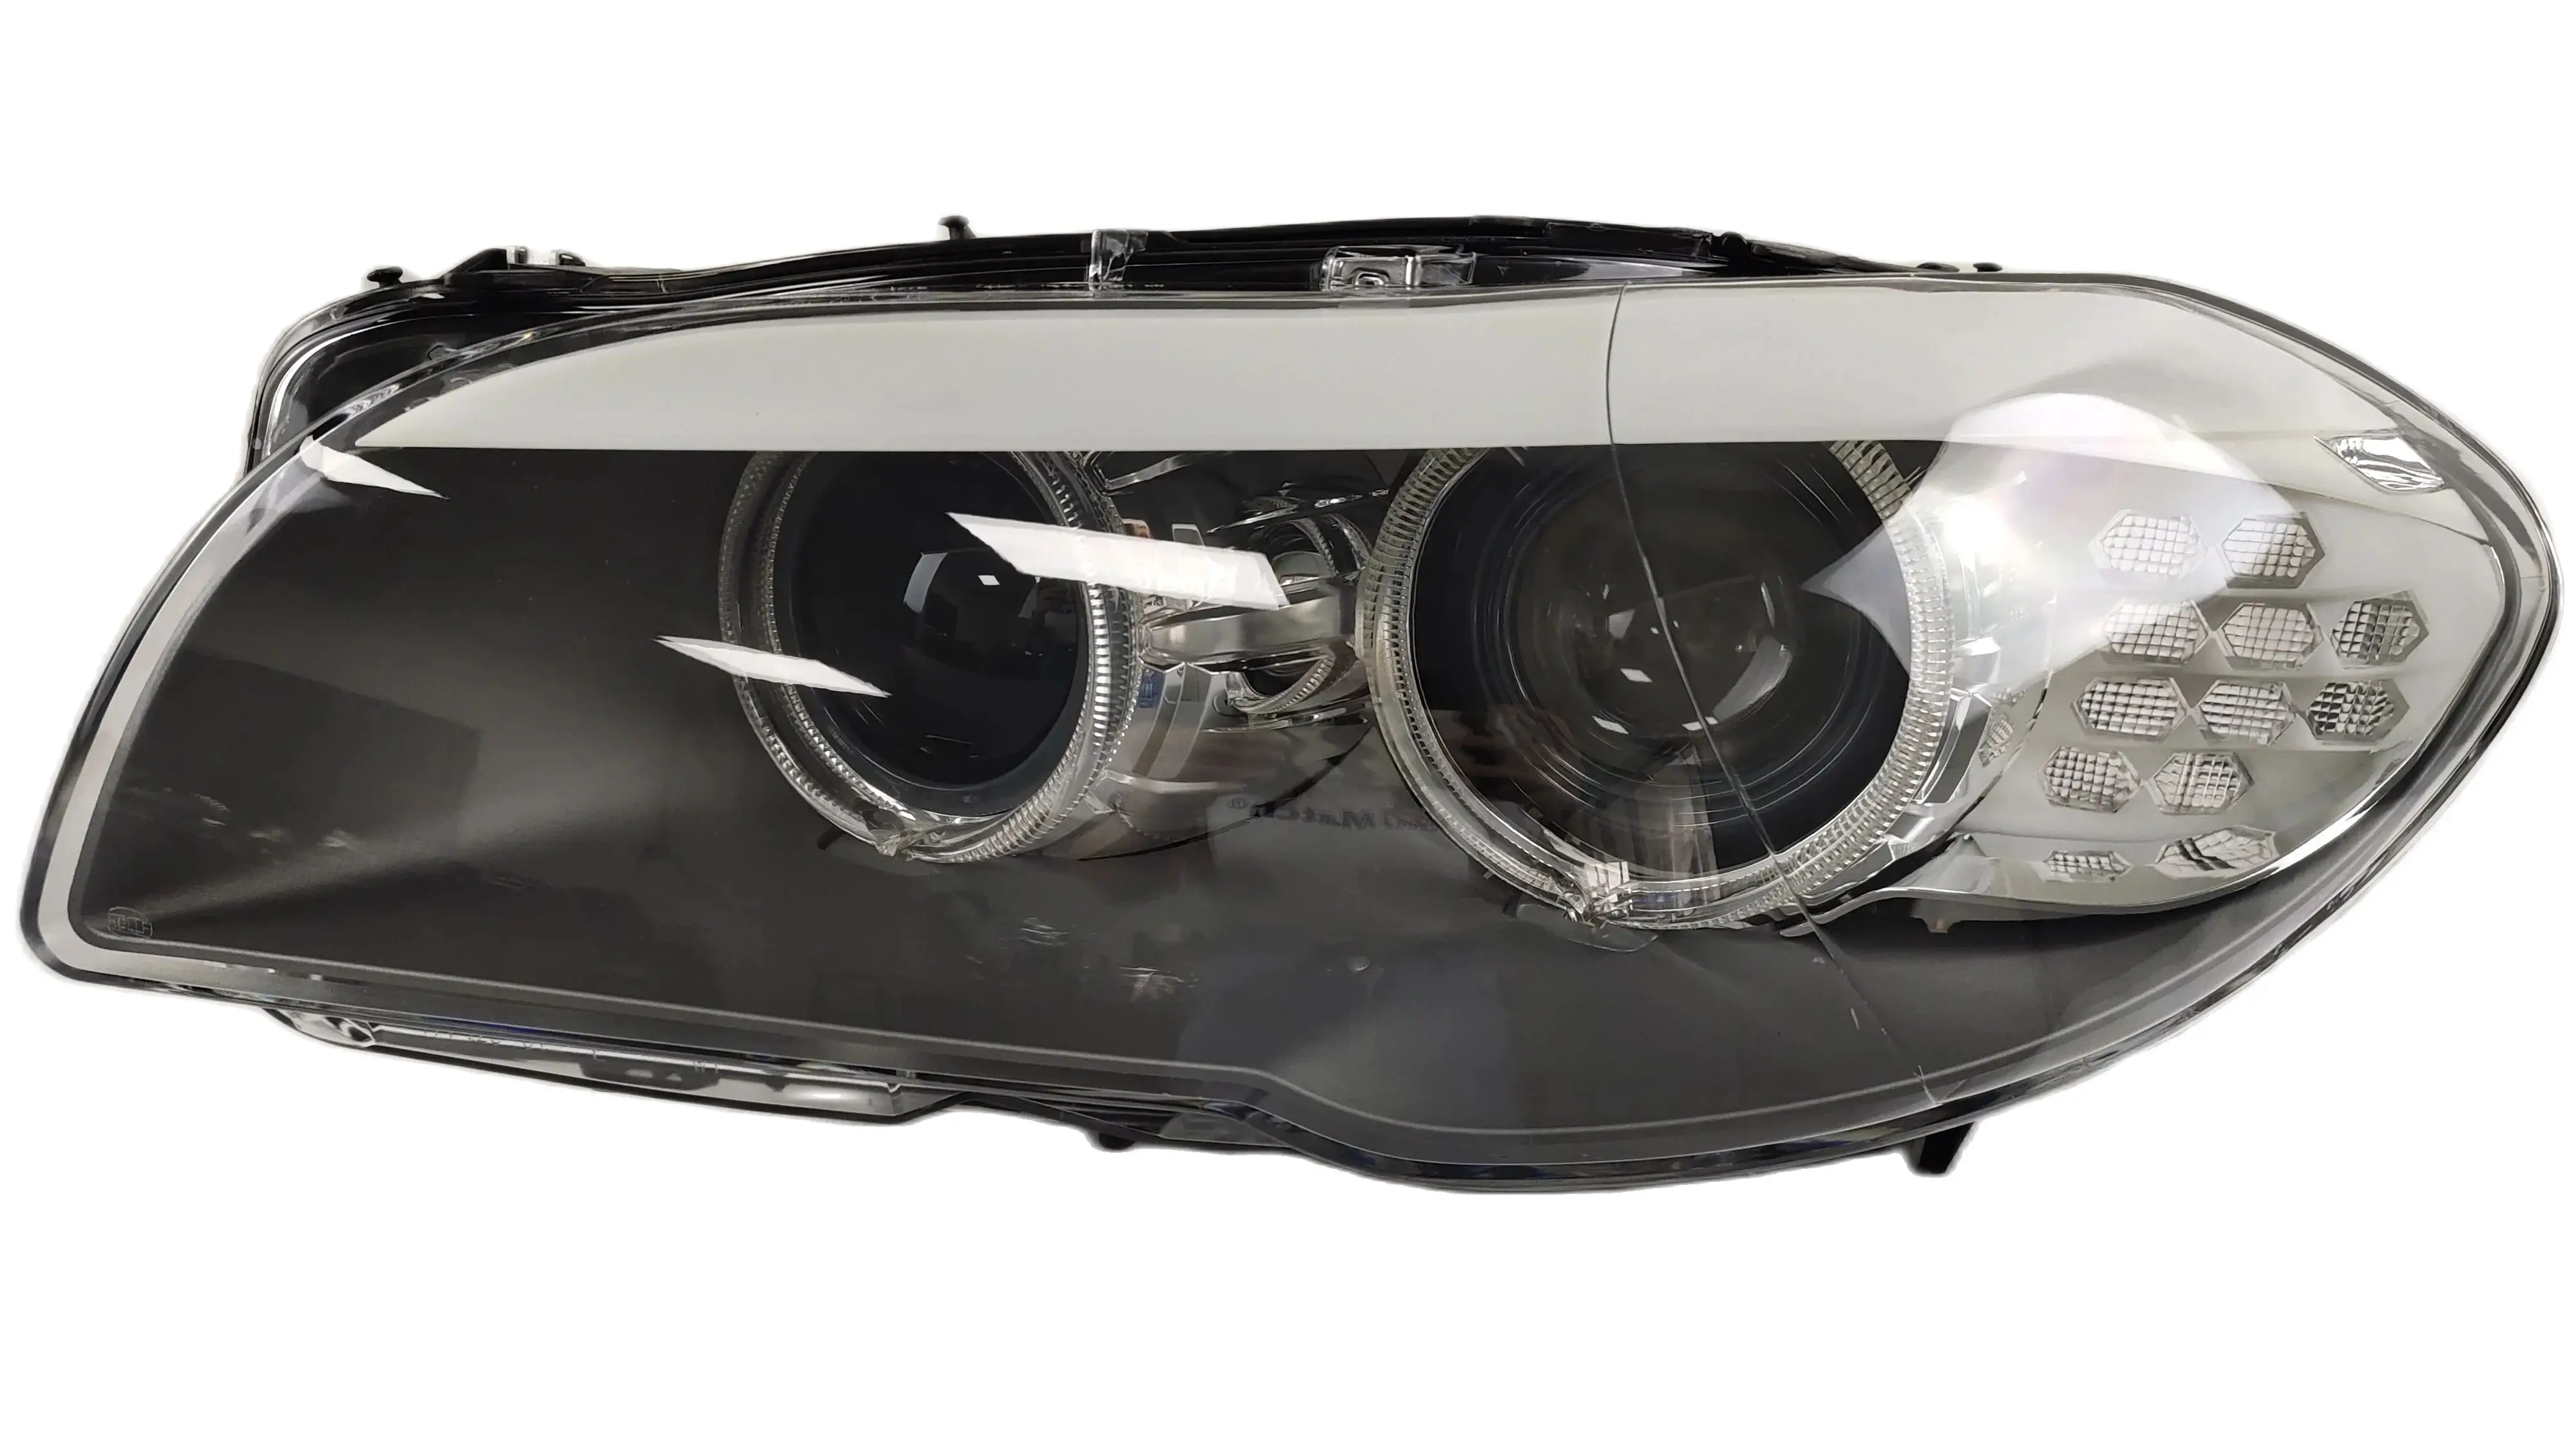 

Suitable for BMW 5 Series F10, F11, F18 Front Lighting Headlamps, Double Hernia Lamp, applicable for model years 09-13, 7271911